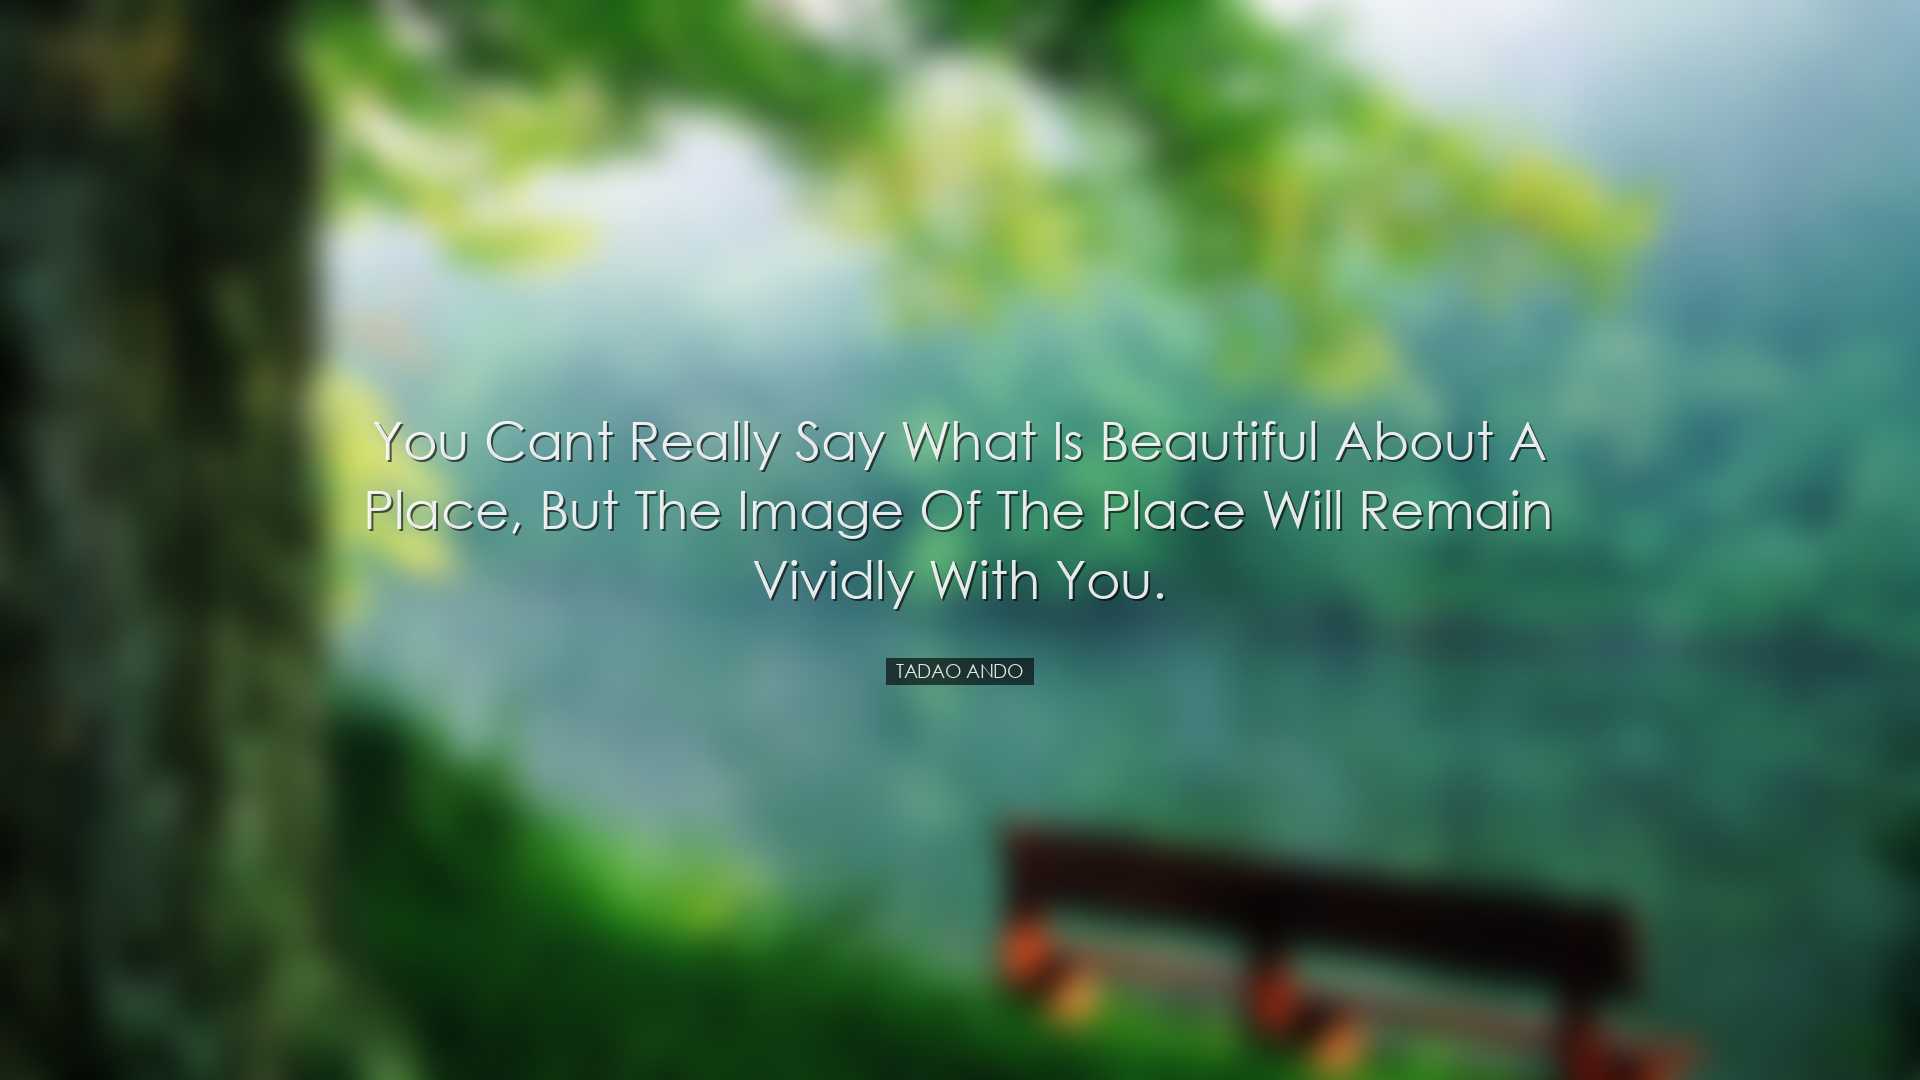 You cant really say what is beautiful about a place, but the image